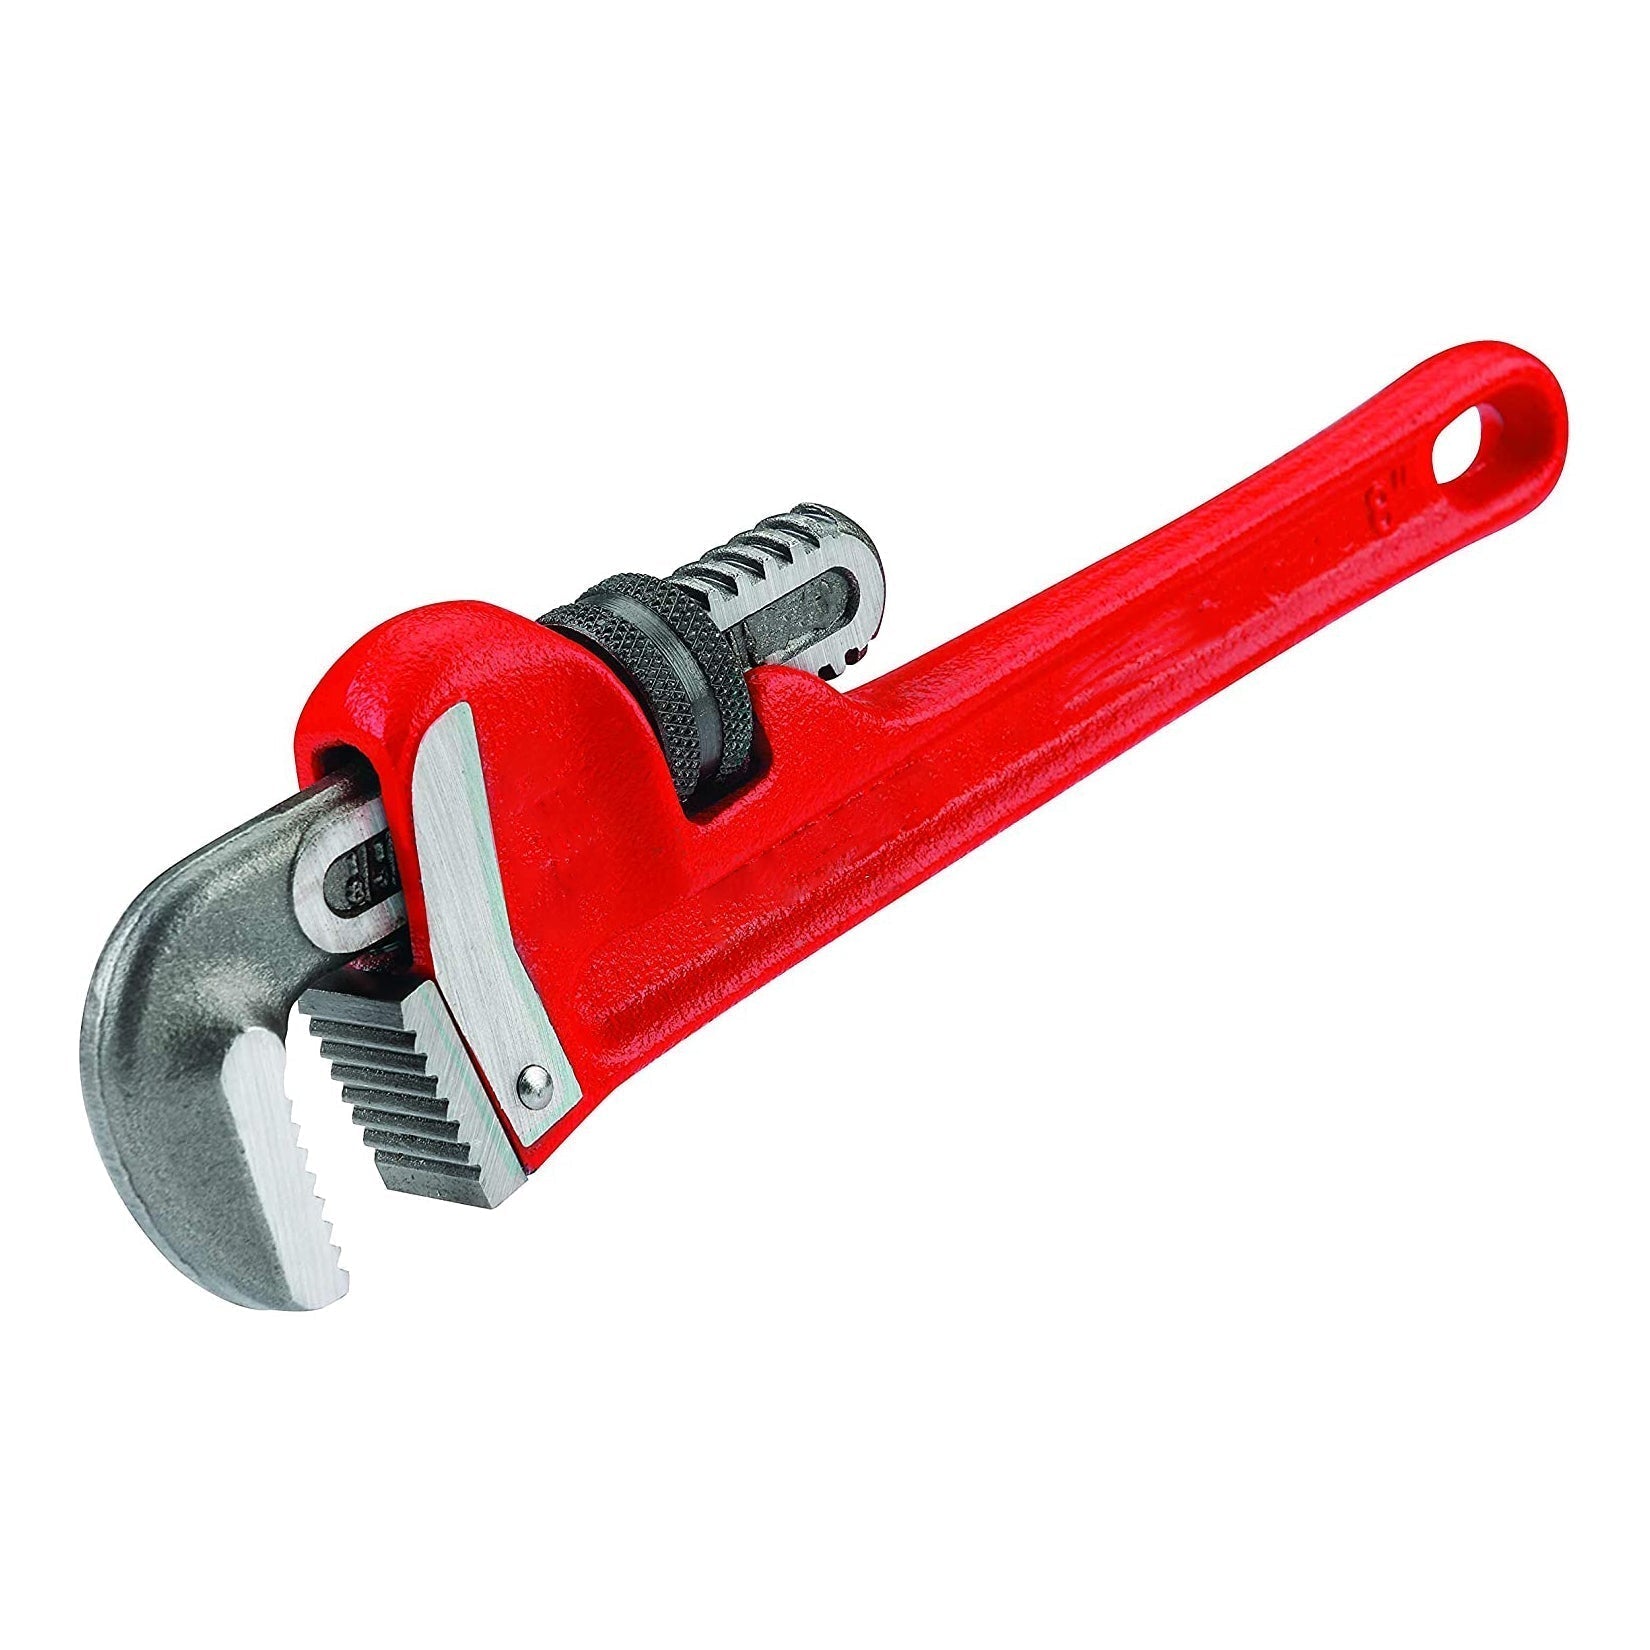 findmall  Heavy Duty Straight Pipe Wrench, 8 Inch Plumbing Wrench, Pipe Capacity 1 Inch, for Pipe Diameters of 1/4 Inch to 3/4 Inch FINDMALLPARTS